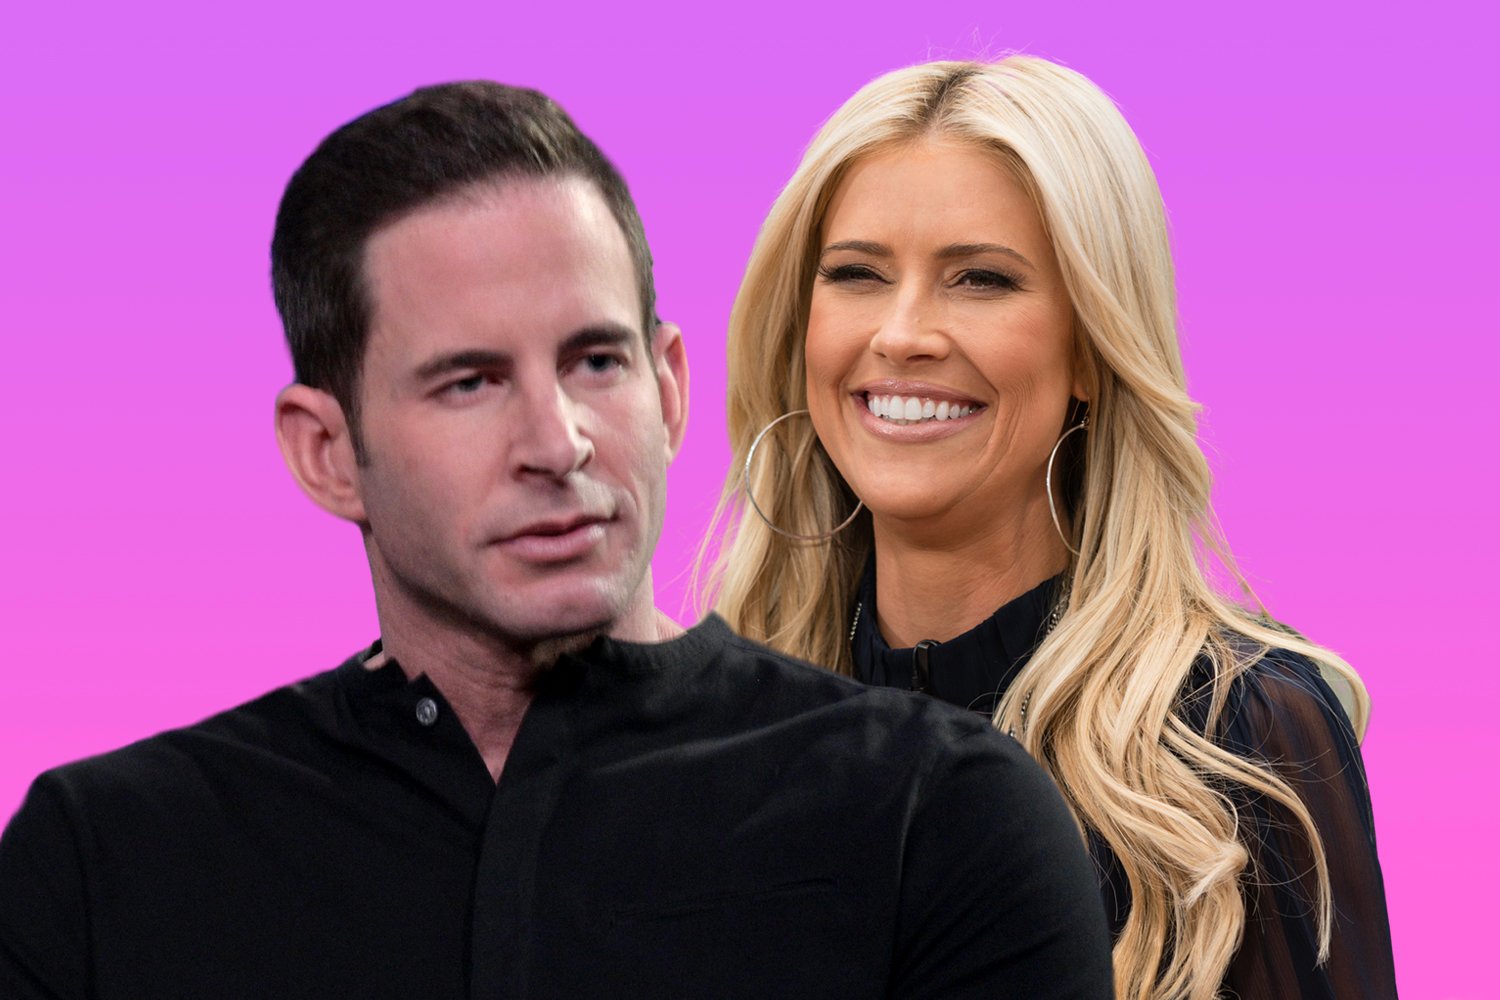 What Christina Haack and Tarek El Moussa Are Doing Next After ‘Flip or Flop’ Ends on HGTV